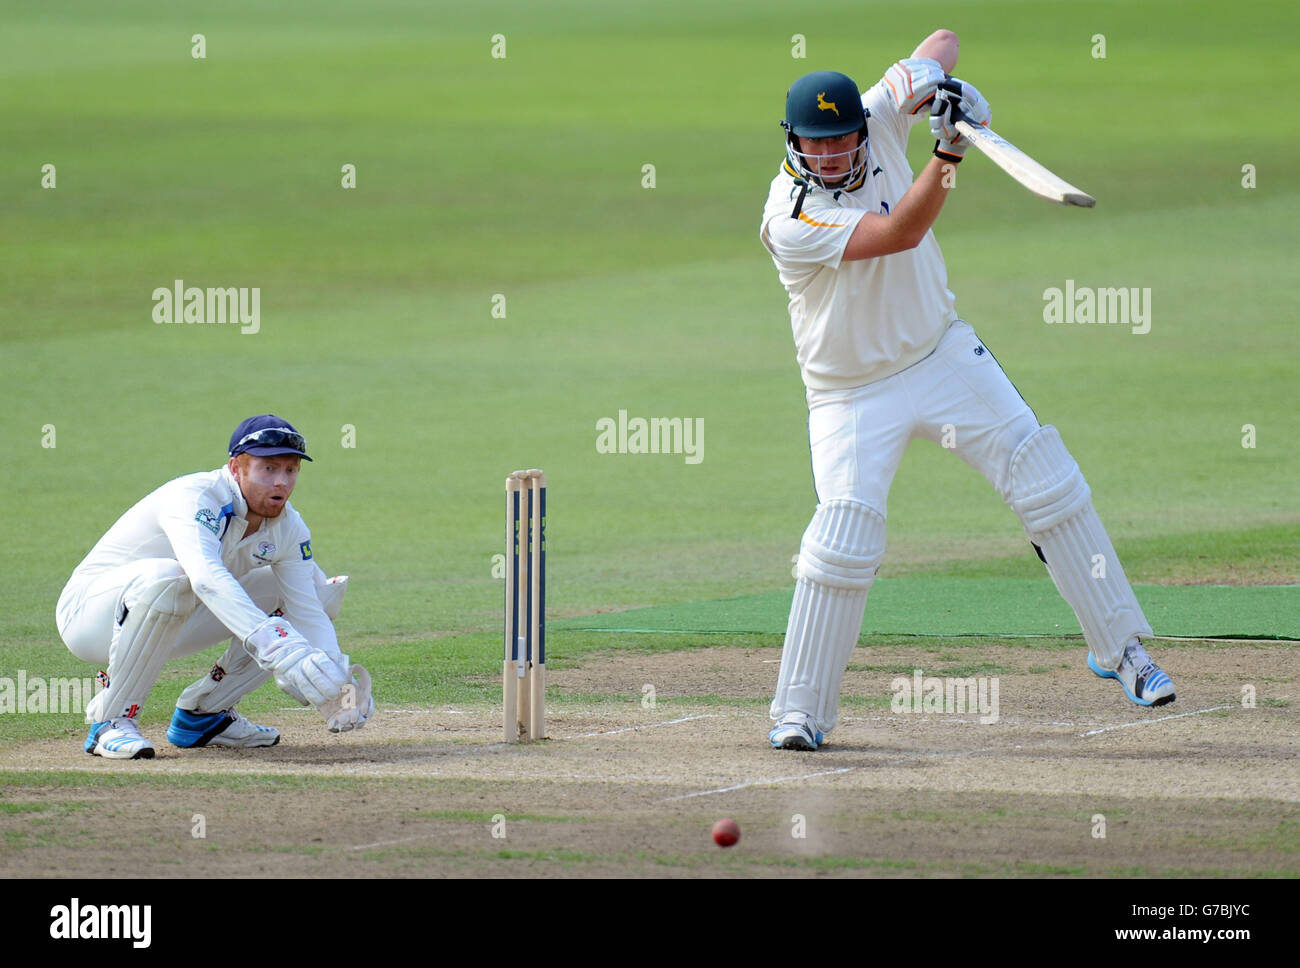 Nottinghamshire's Luke Fletcher bats during day three of the LV= County Championship Division One match at Trent Bridge, Nottingham. Picture date: Thursday September 11, 2014. See PA story CRICKET Nottinghamshire. Photo credit should read: Simon Cooper/PA Wire Stock Photo